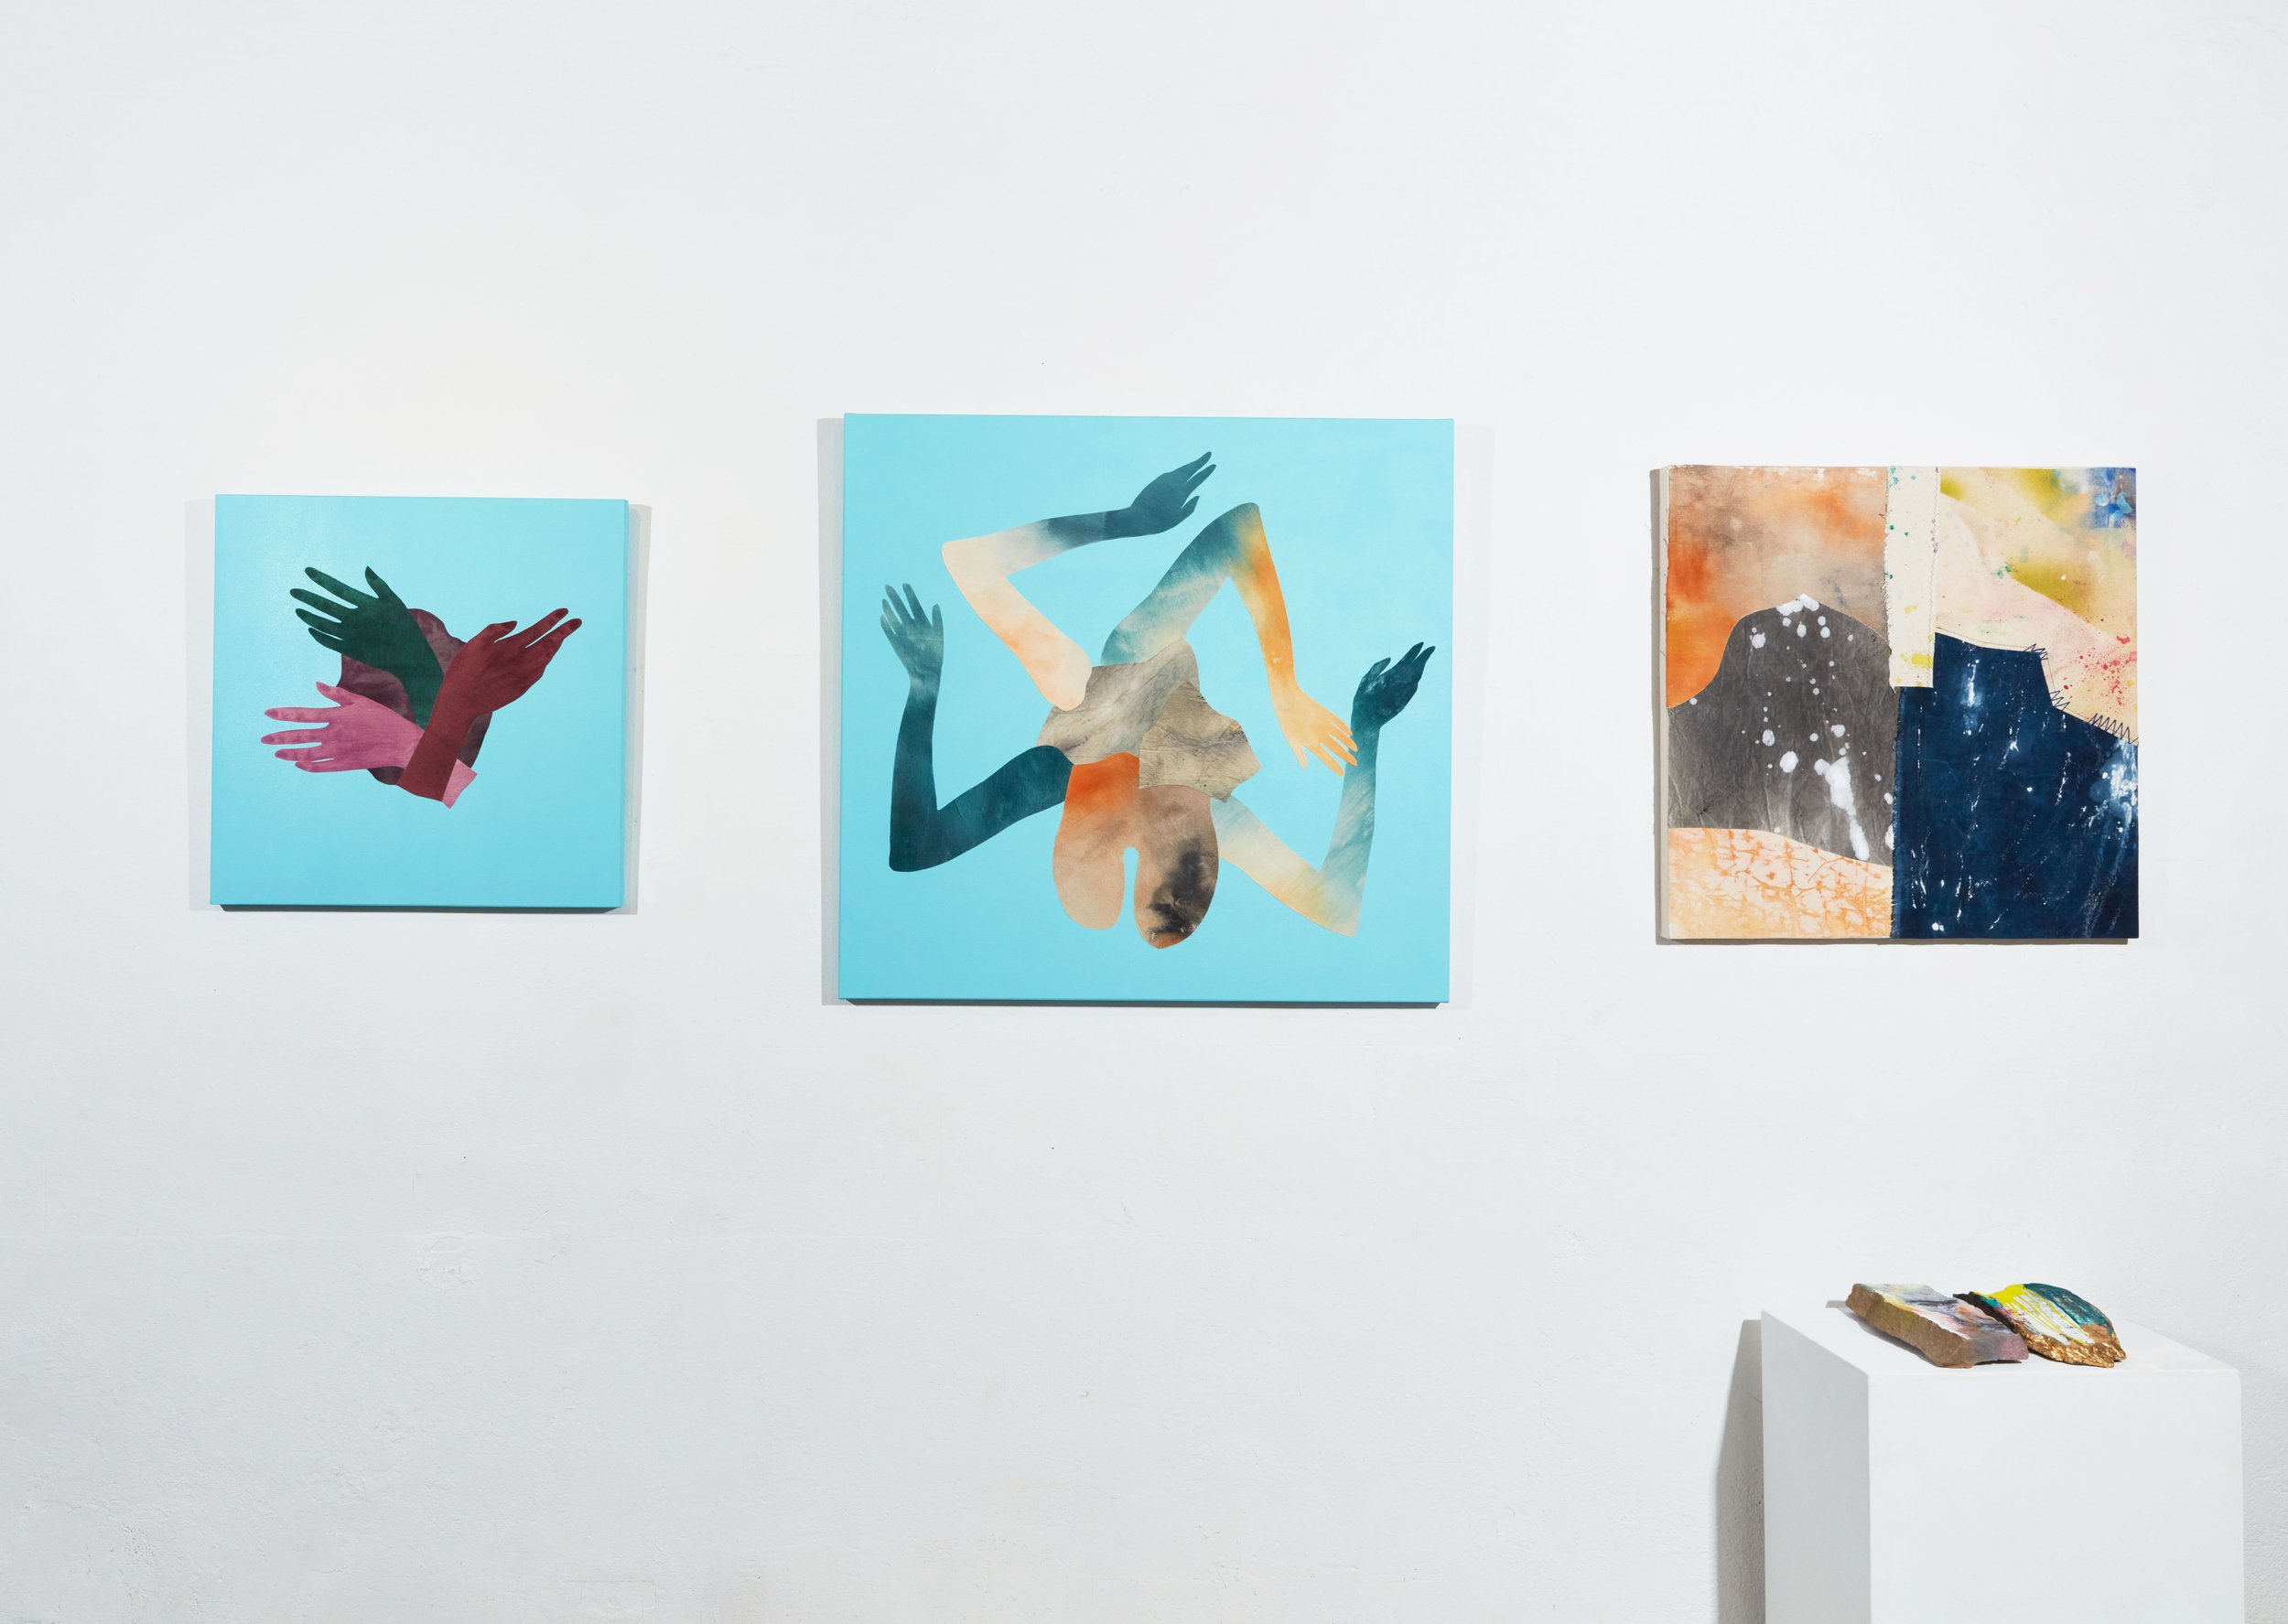  Installation view;  United Emblem ,  Diete ,  Cicatrize  and  Kryptonite  